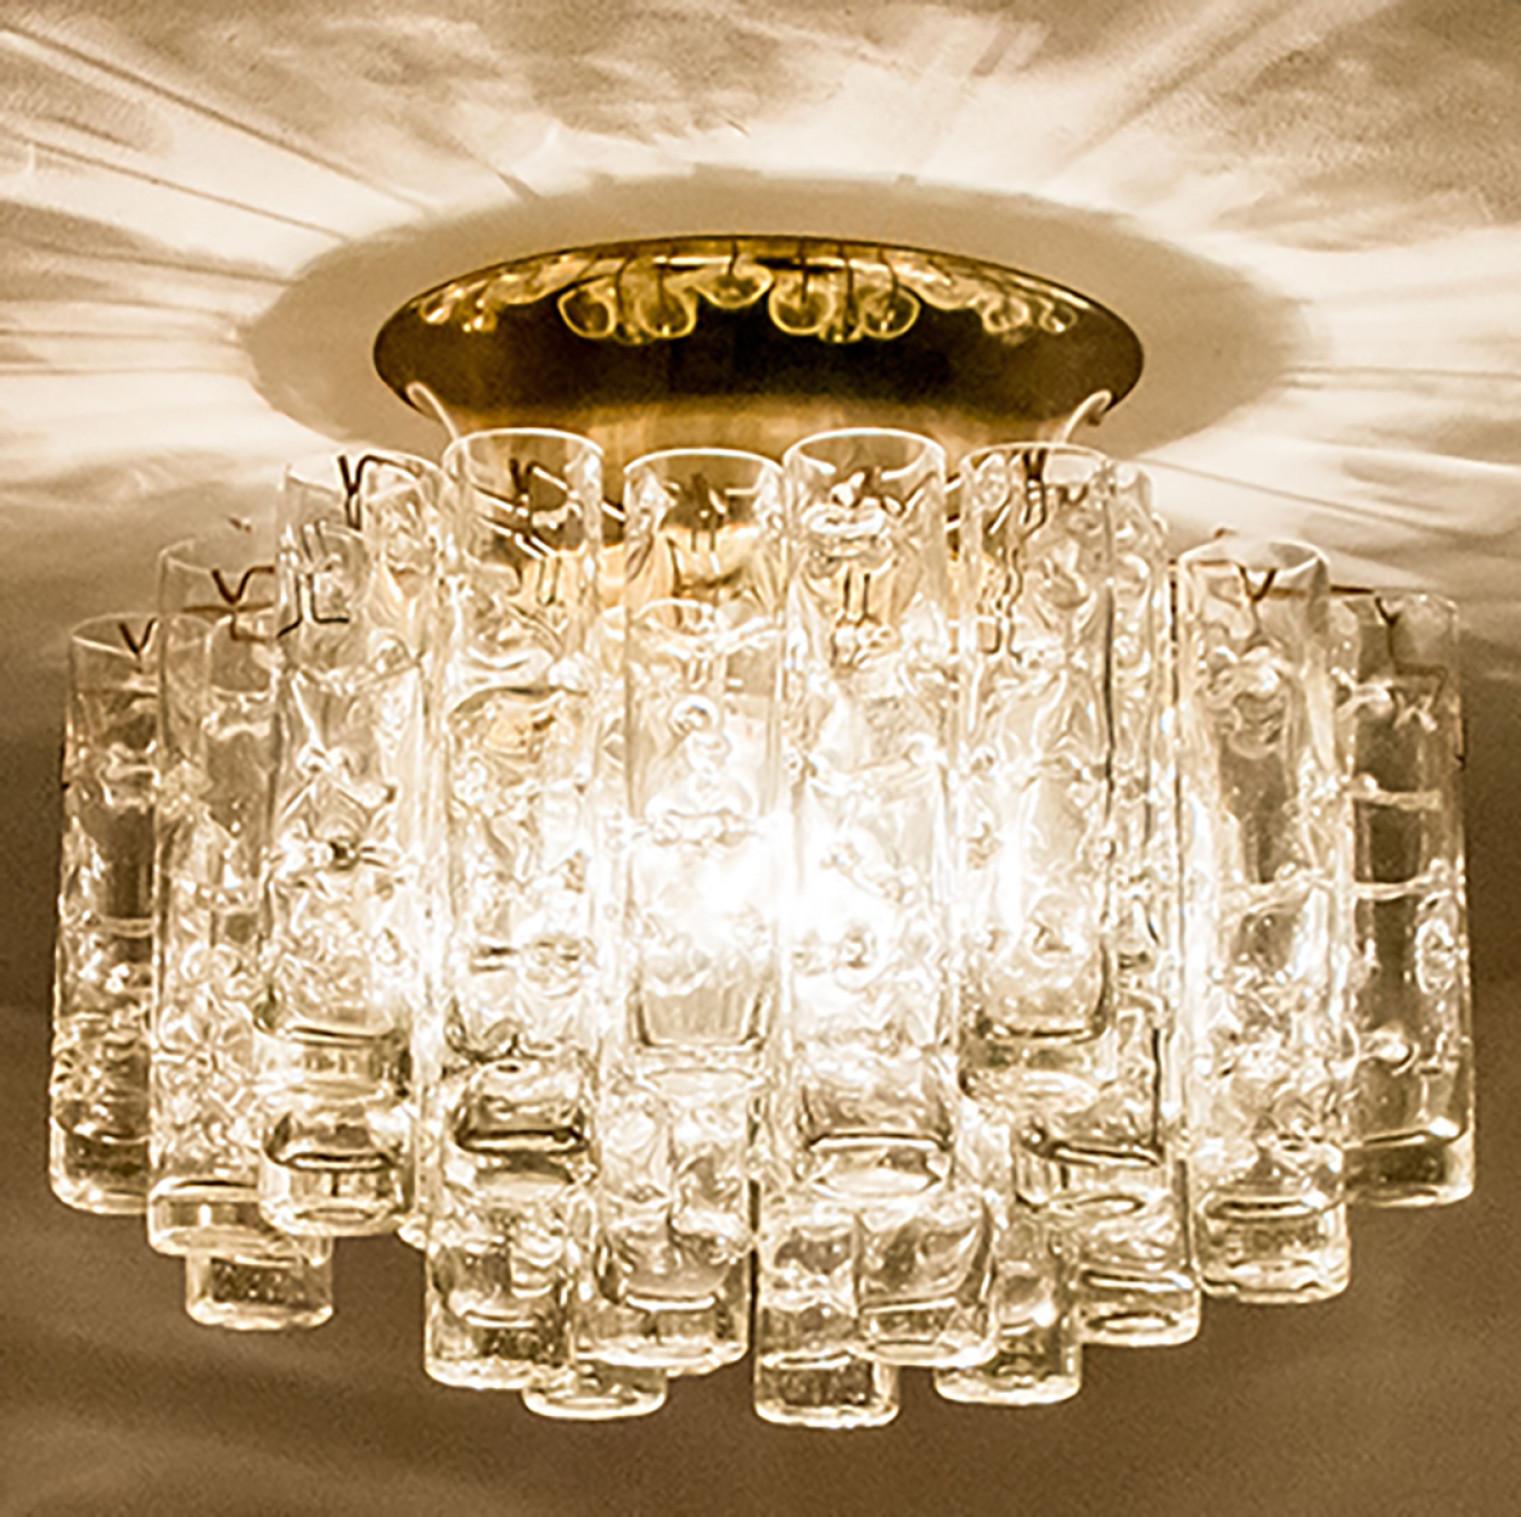 Star-shaped glass flush mount, manufactured by Doria Leuchten Germany in circa 1960.

This handmade light consists of a brass base with an array of high/end textured round tube-shaped art glass rods. Due the combination of materials, opal and clear